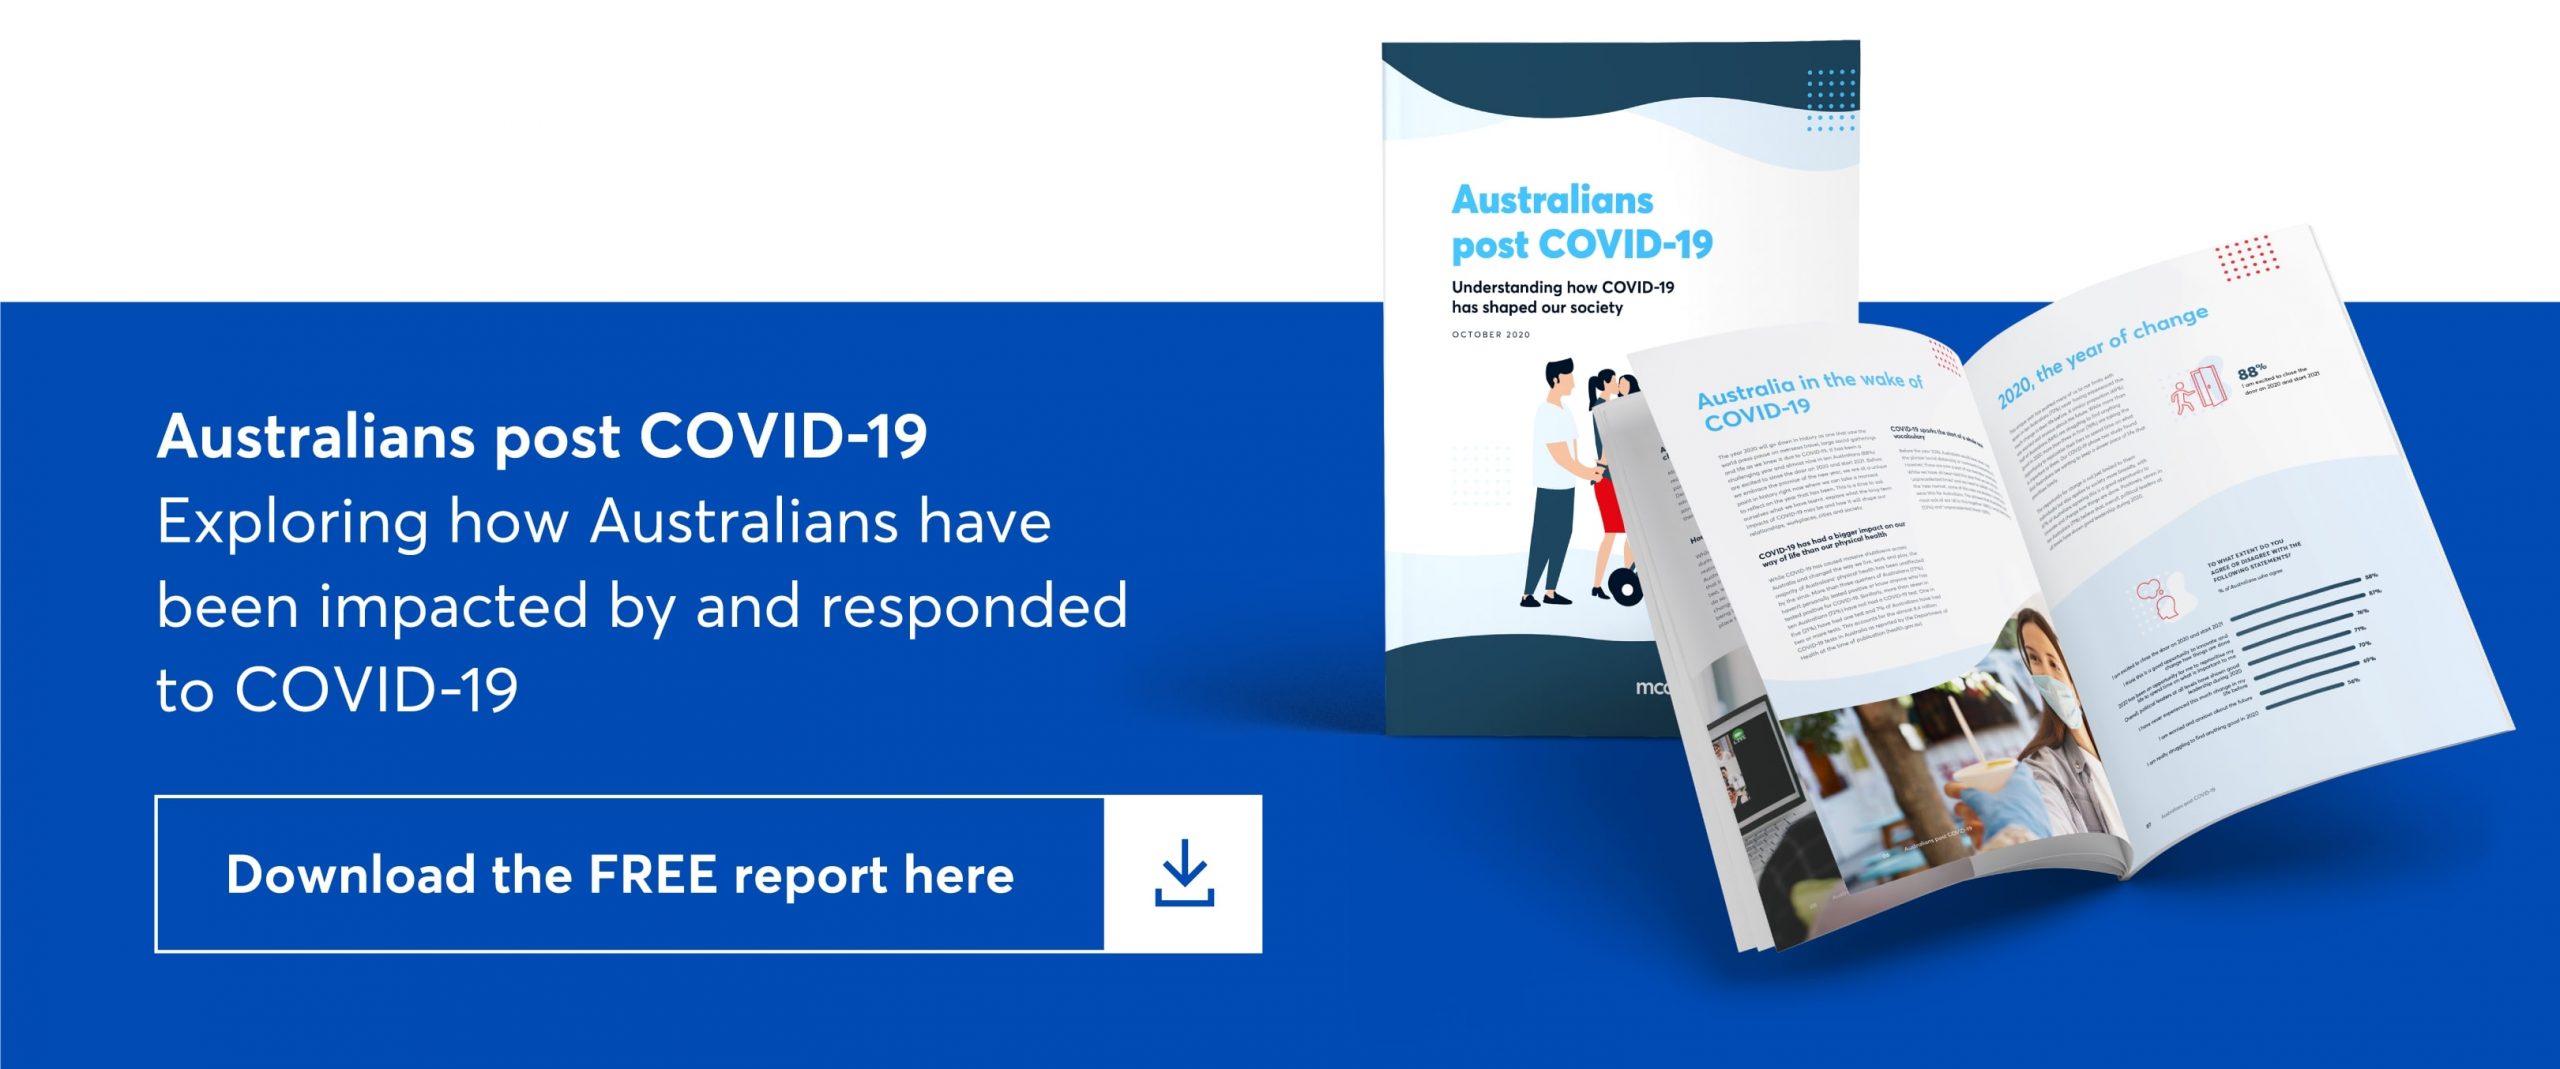 australians post-covid-19, download the free report here